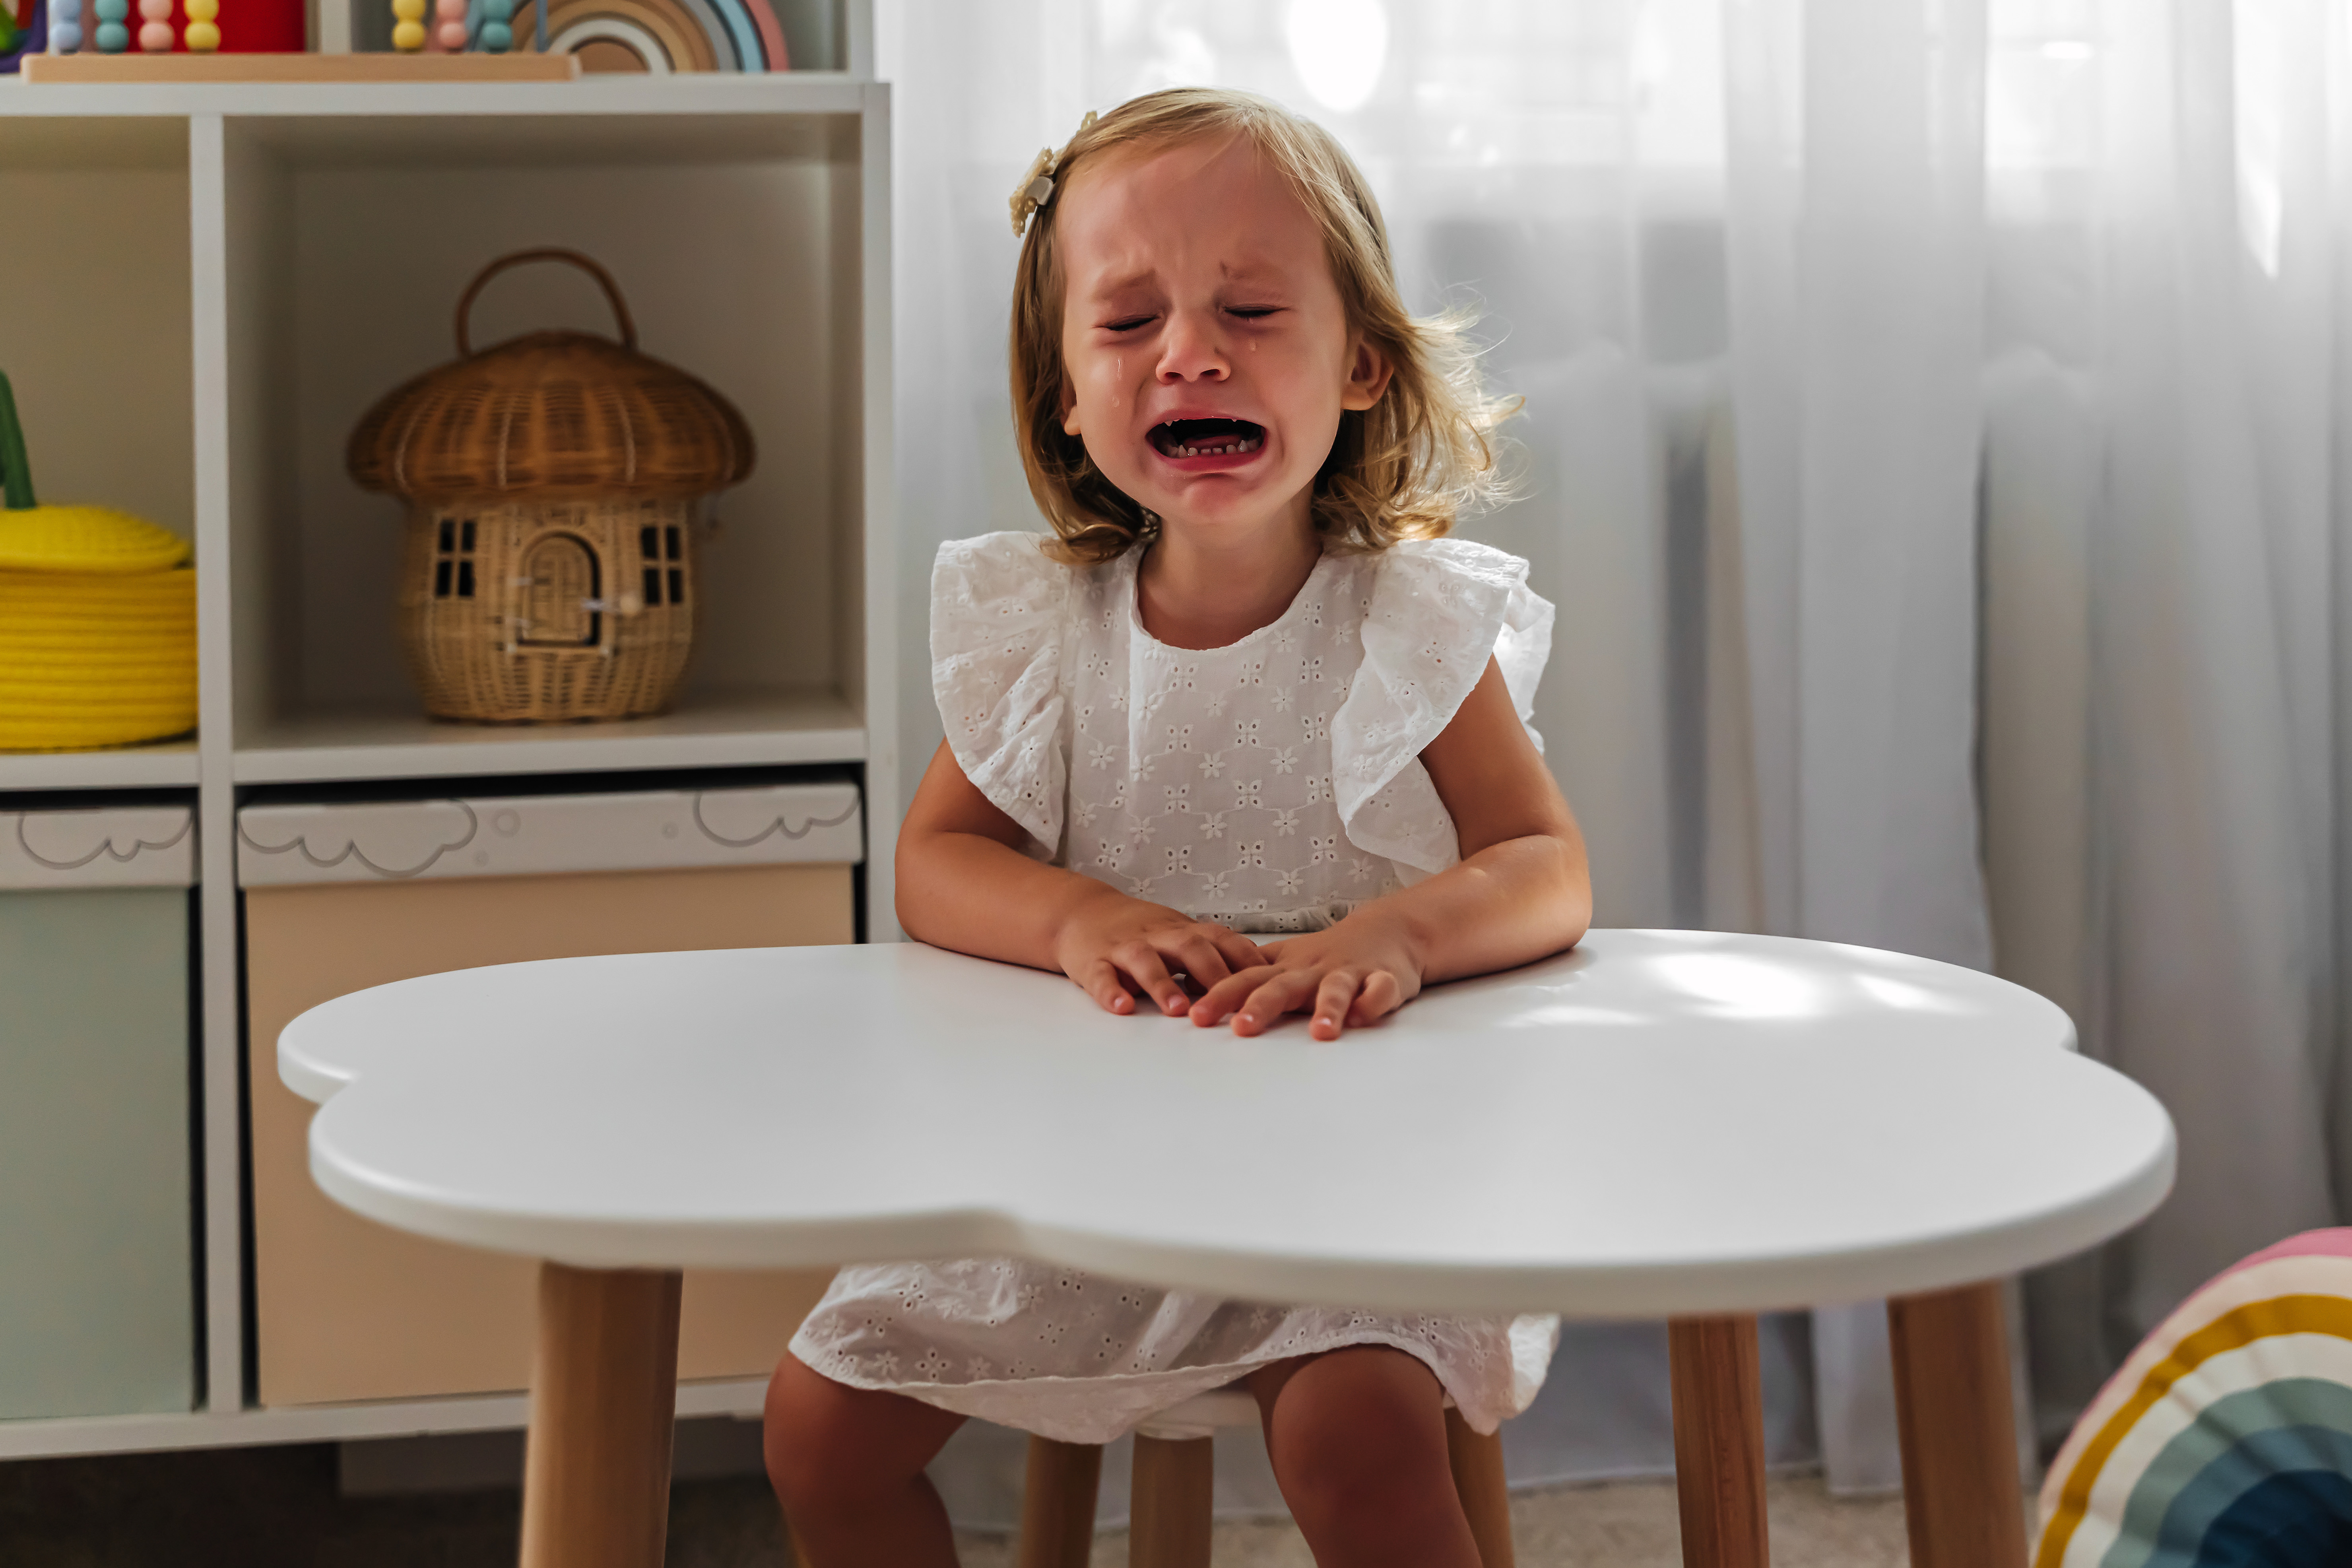 A little girl crying while sitting at the table in her class | Source: Getty Images